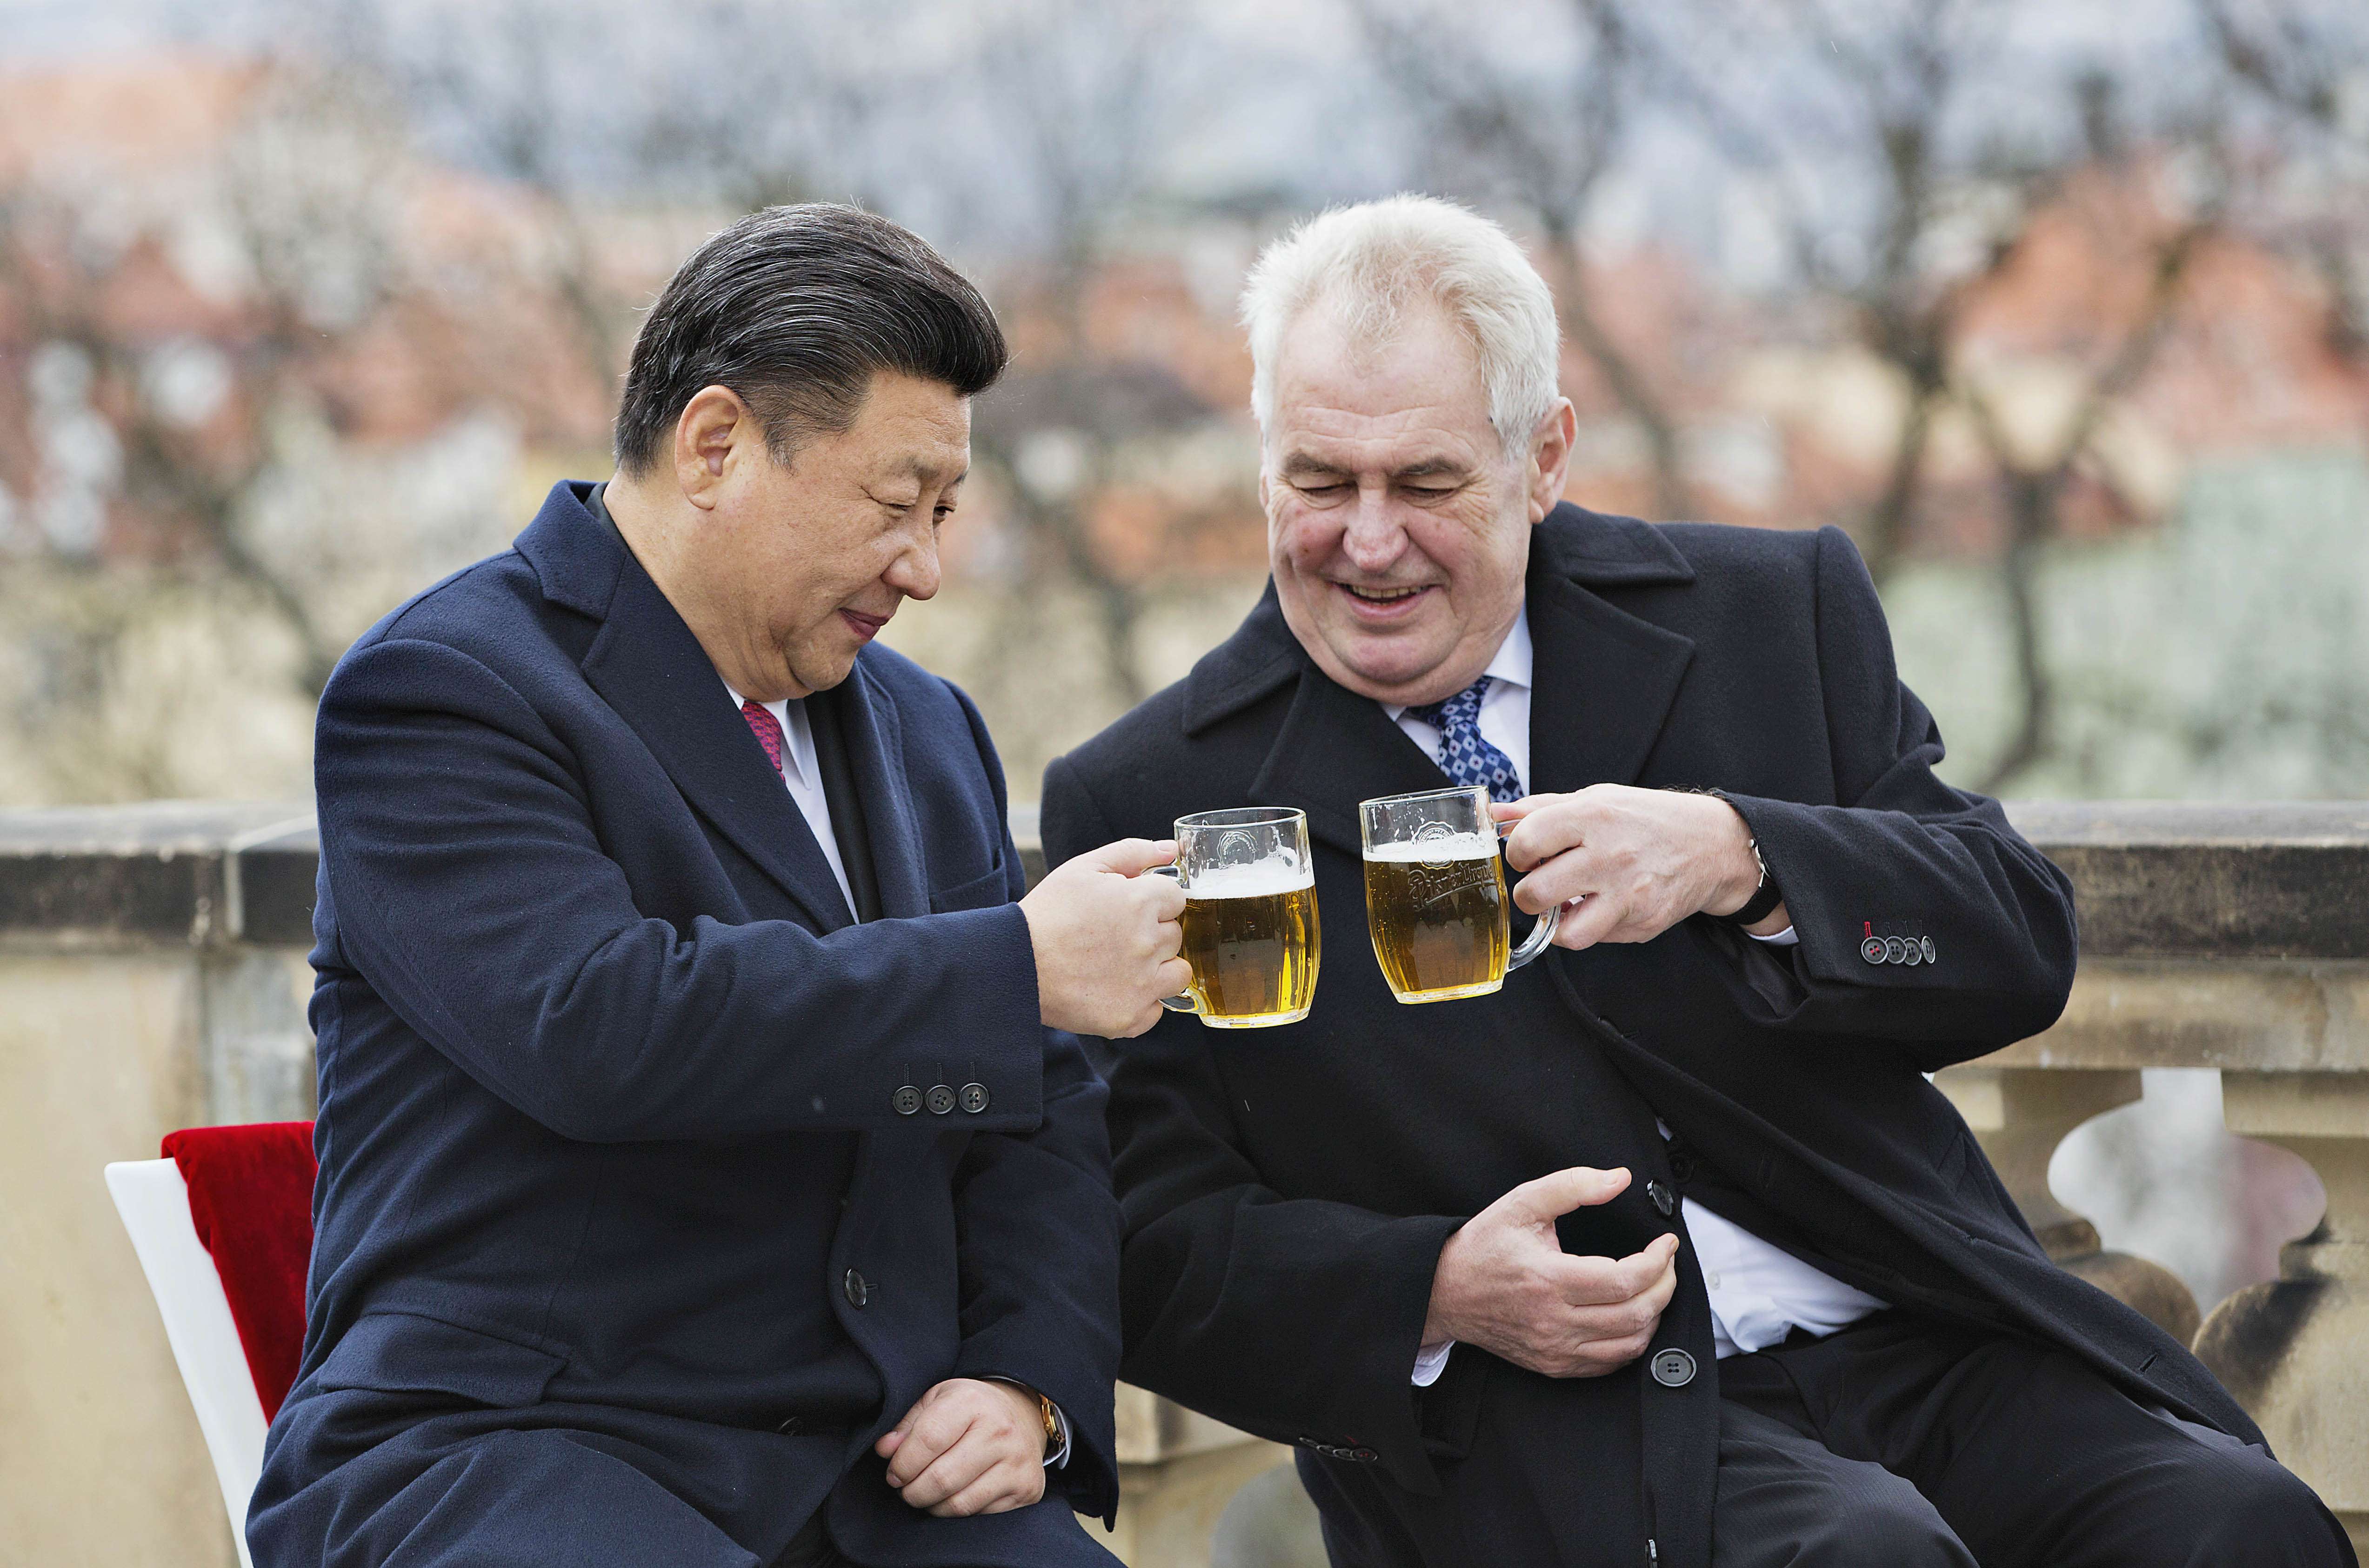 President Xi Jinping and Czech Republic President Milos Zeman toast a drink on the terrace of the Strahov Monastery in Prague. Photo: AP